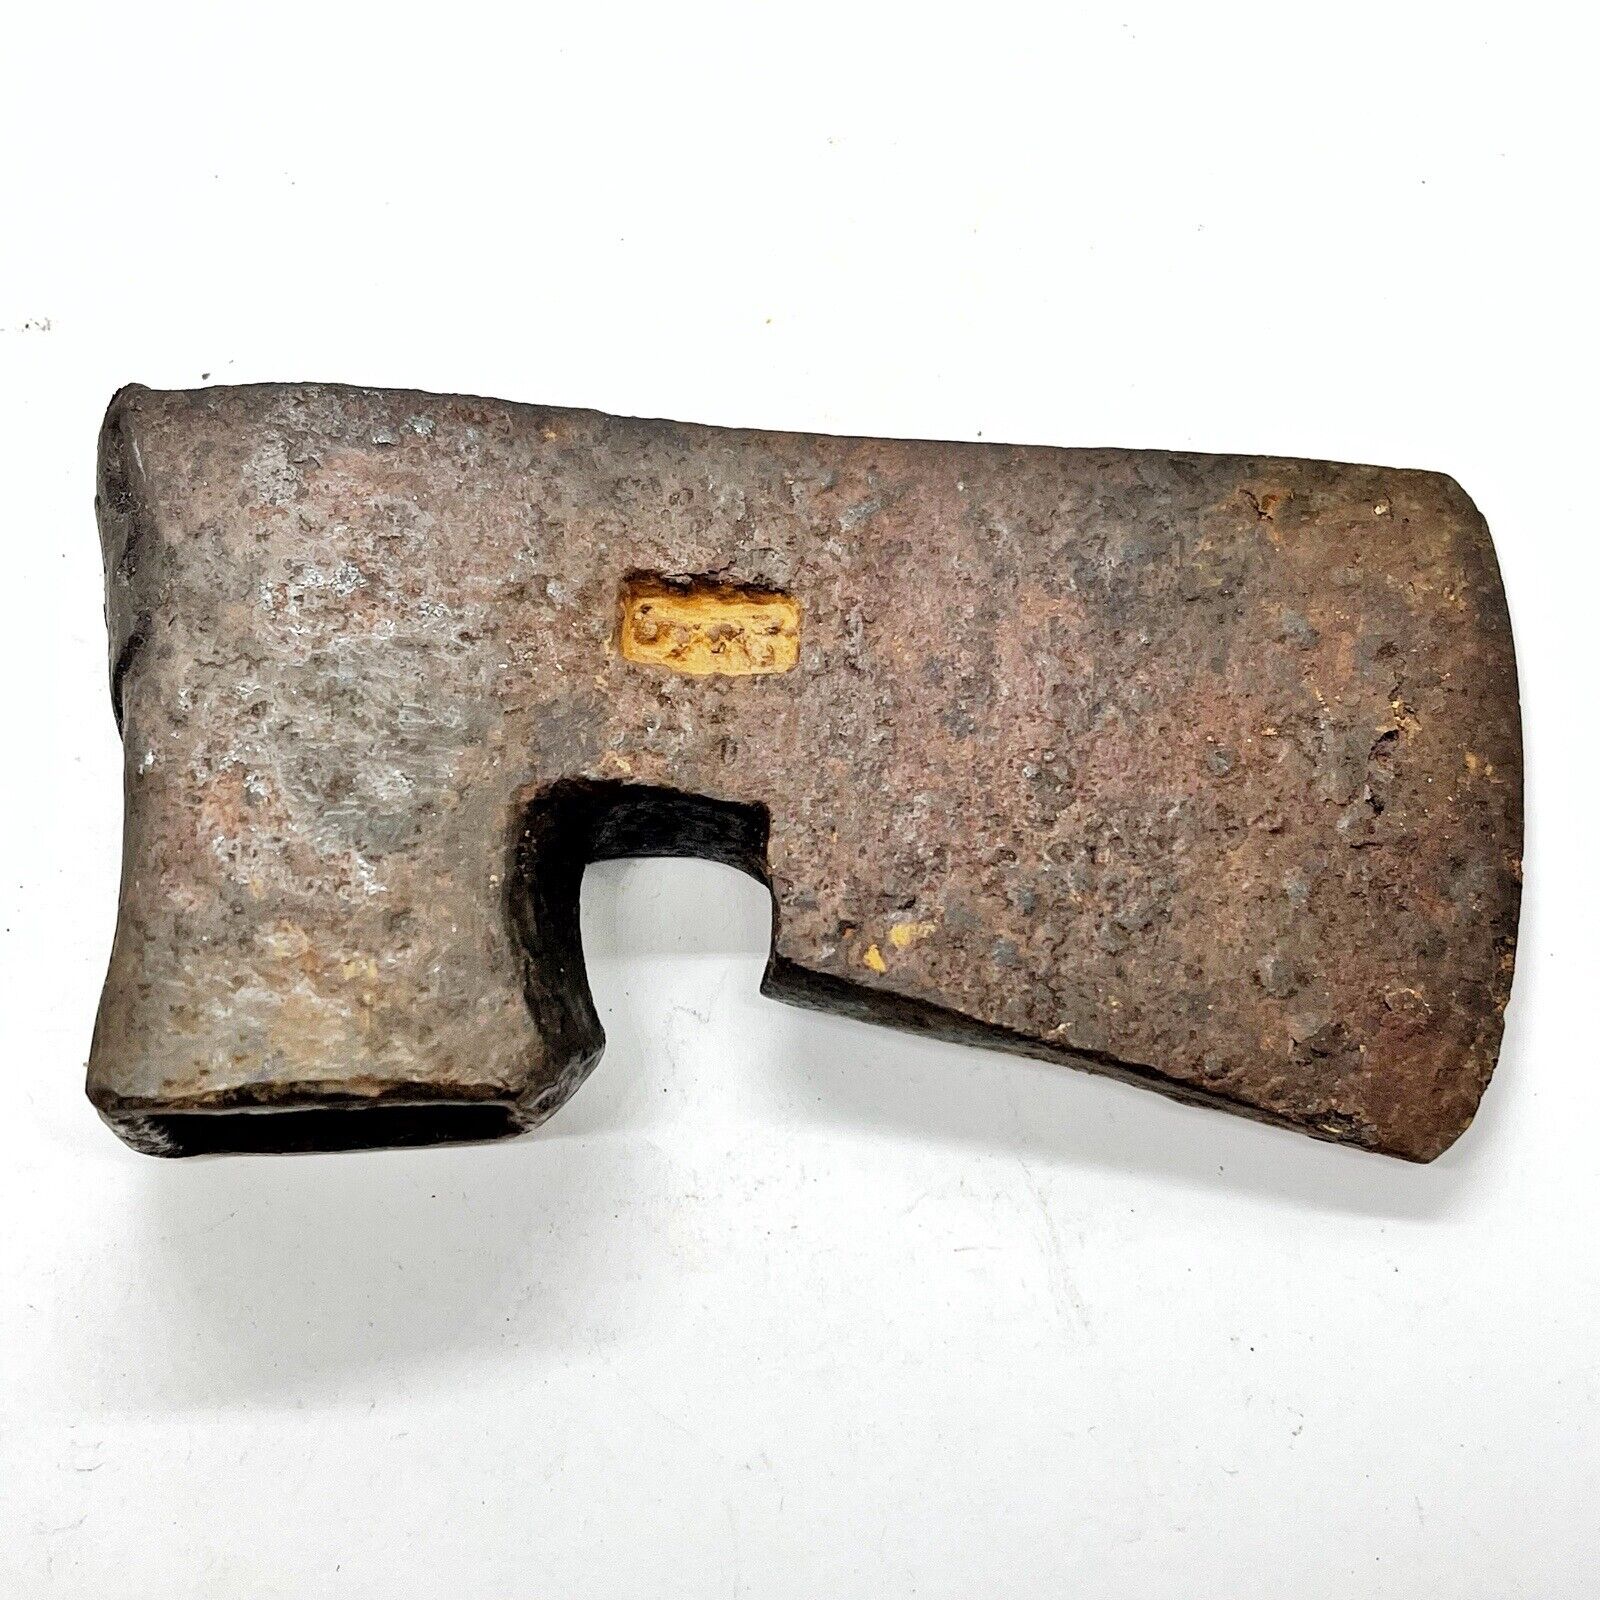 RARE Medieval Europe Axe Head Circa 1100-1500’s AD Battle Weapon? Unknown Stamp